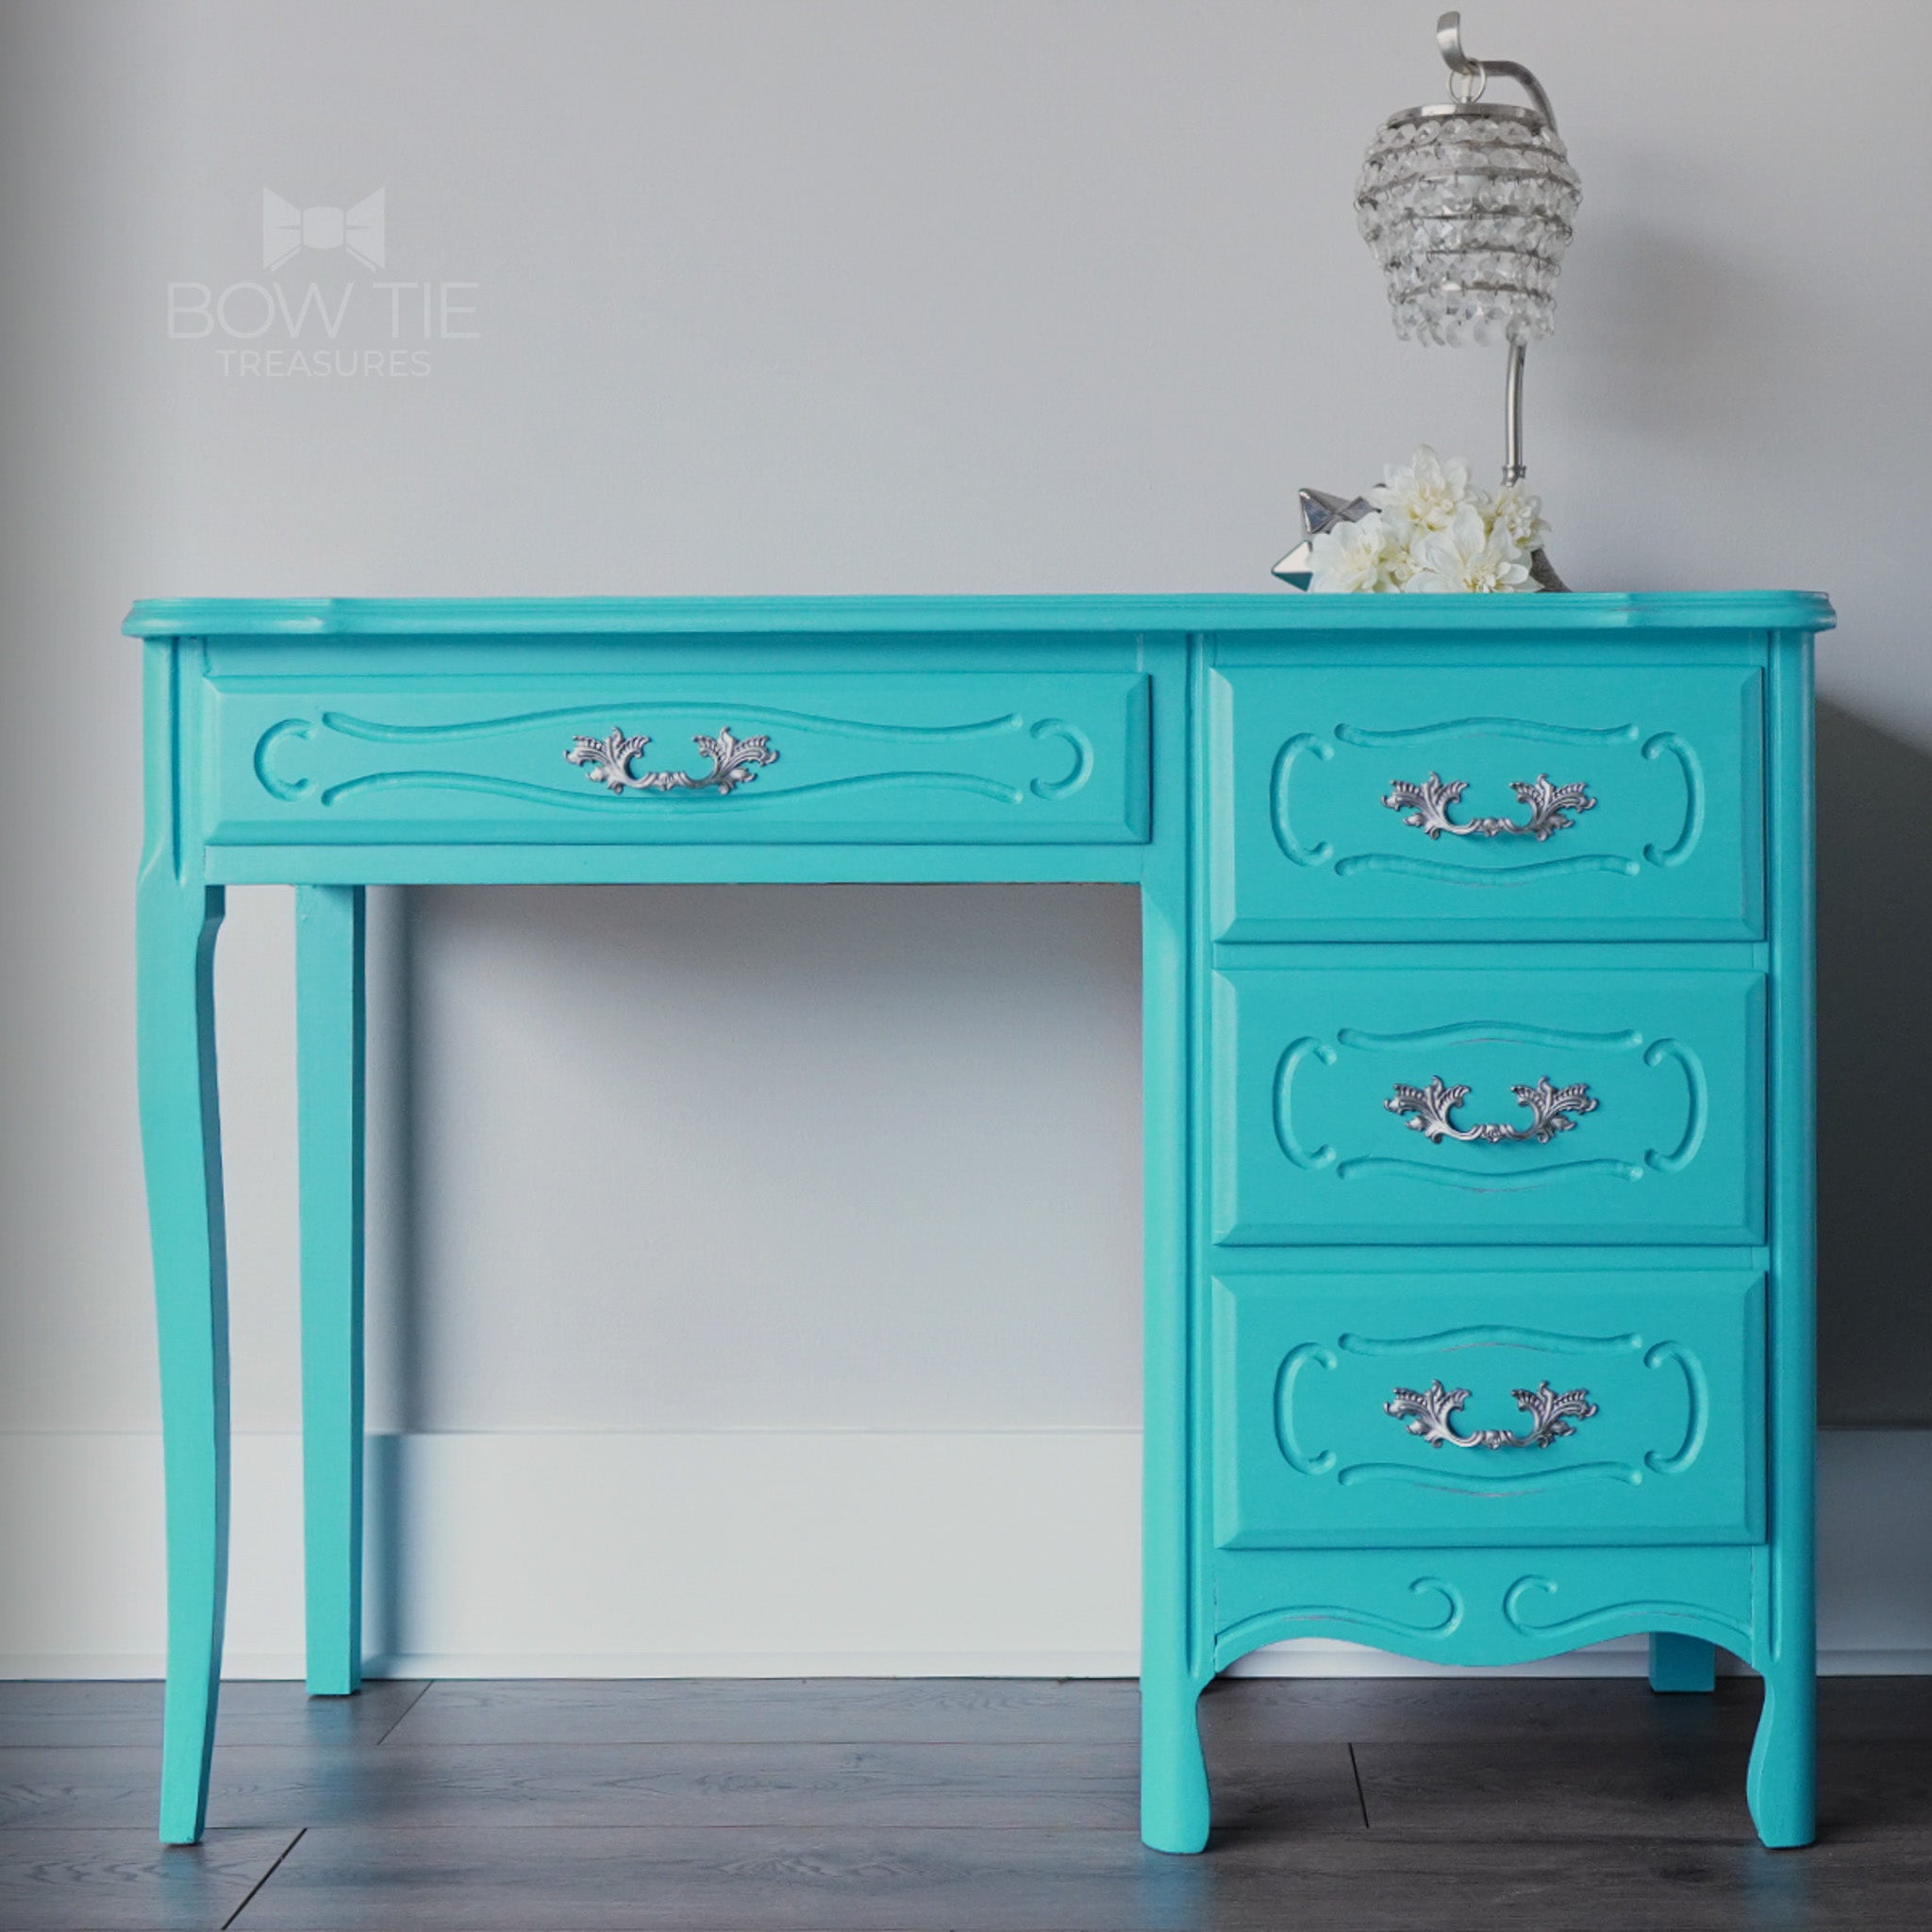 A vintage desk with 4 drawers is painted in Dixie Belle's Pure Ocean chalk mineral paint.